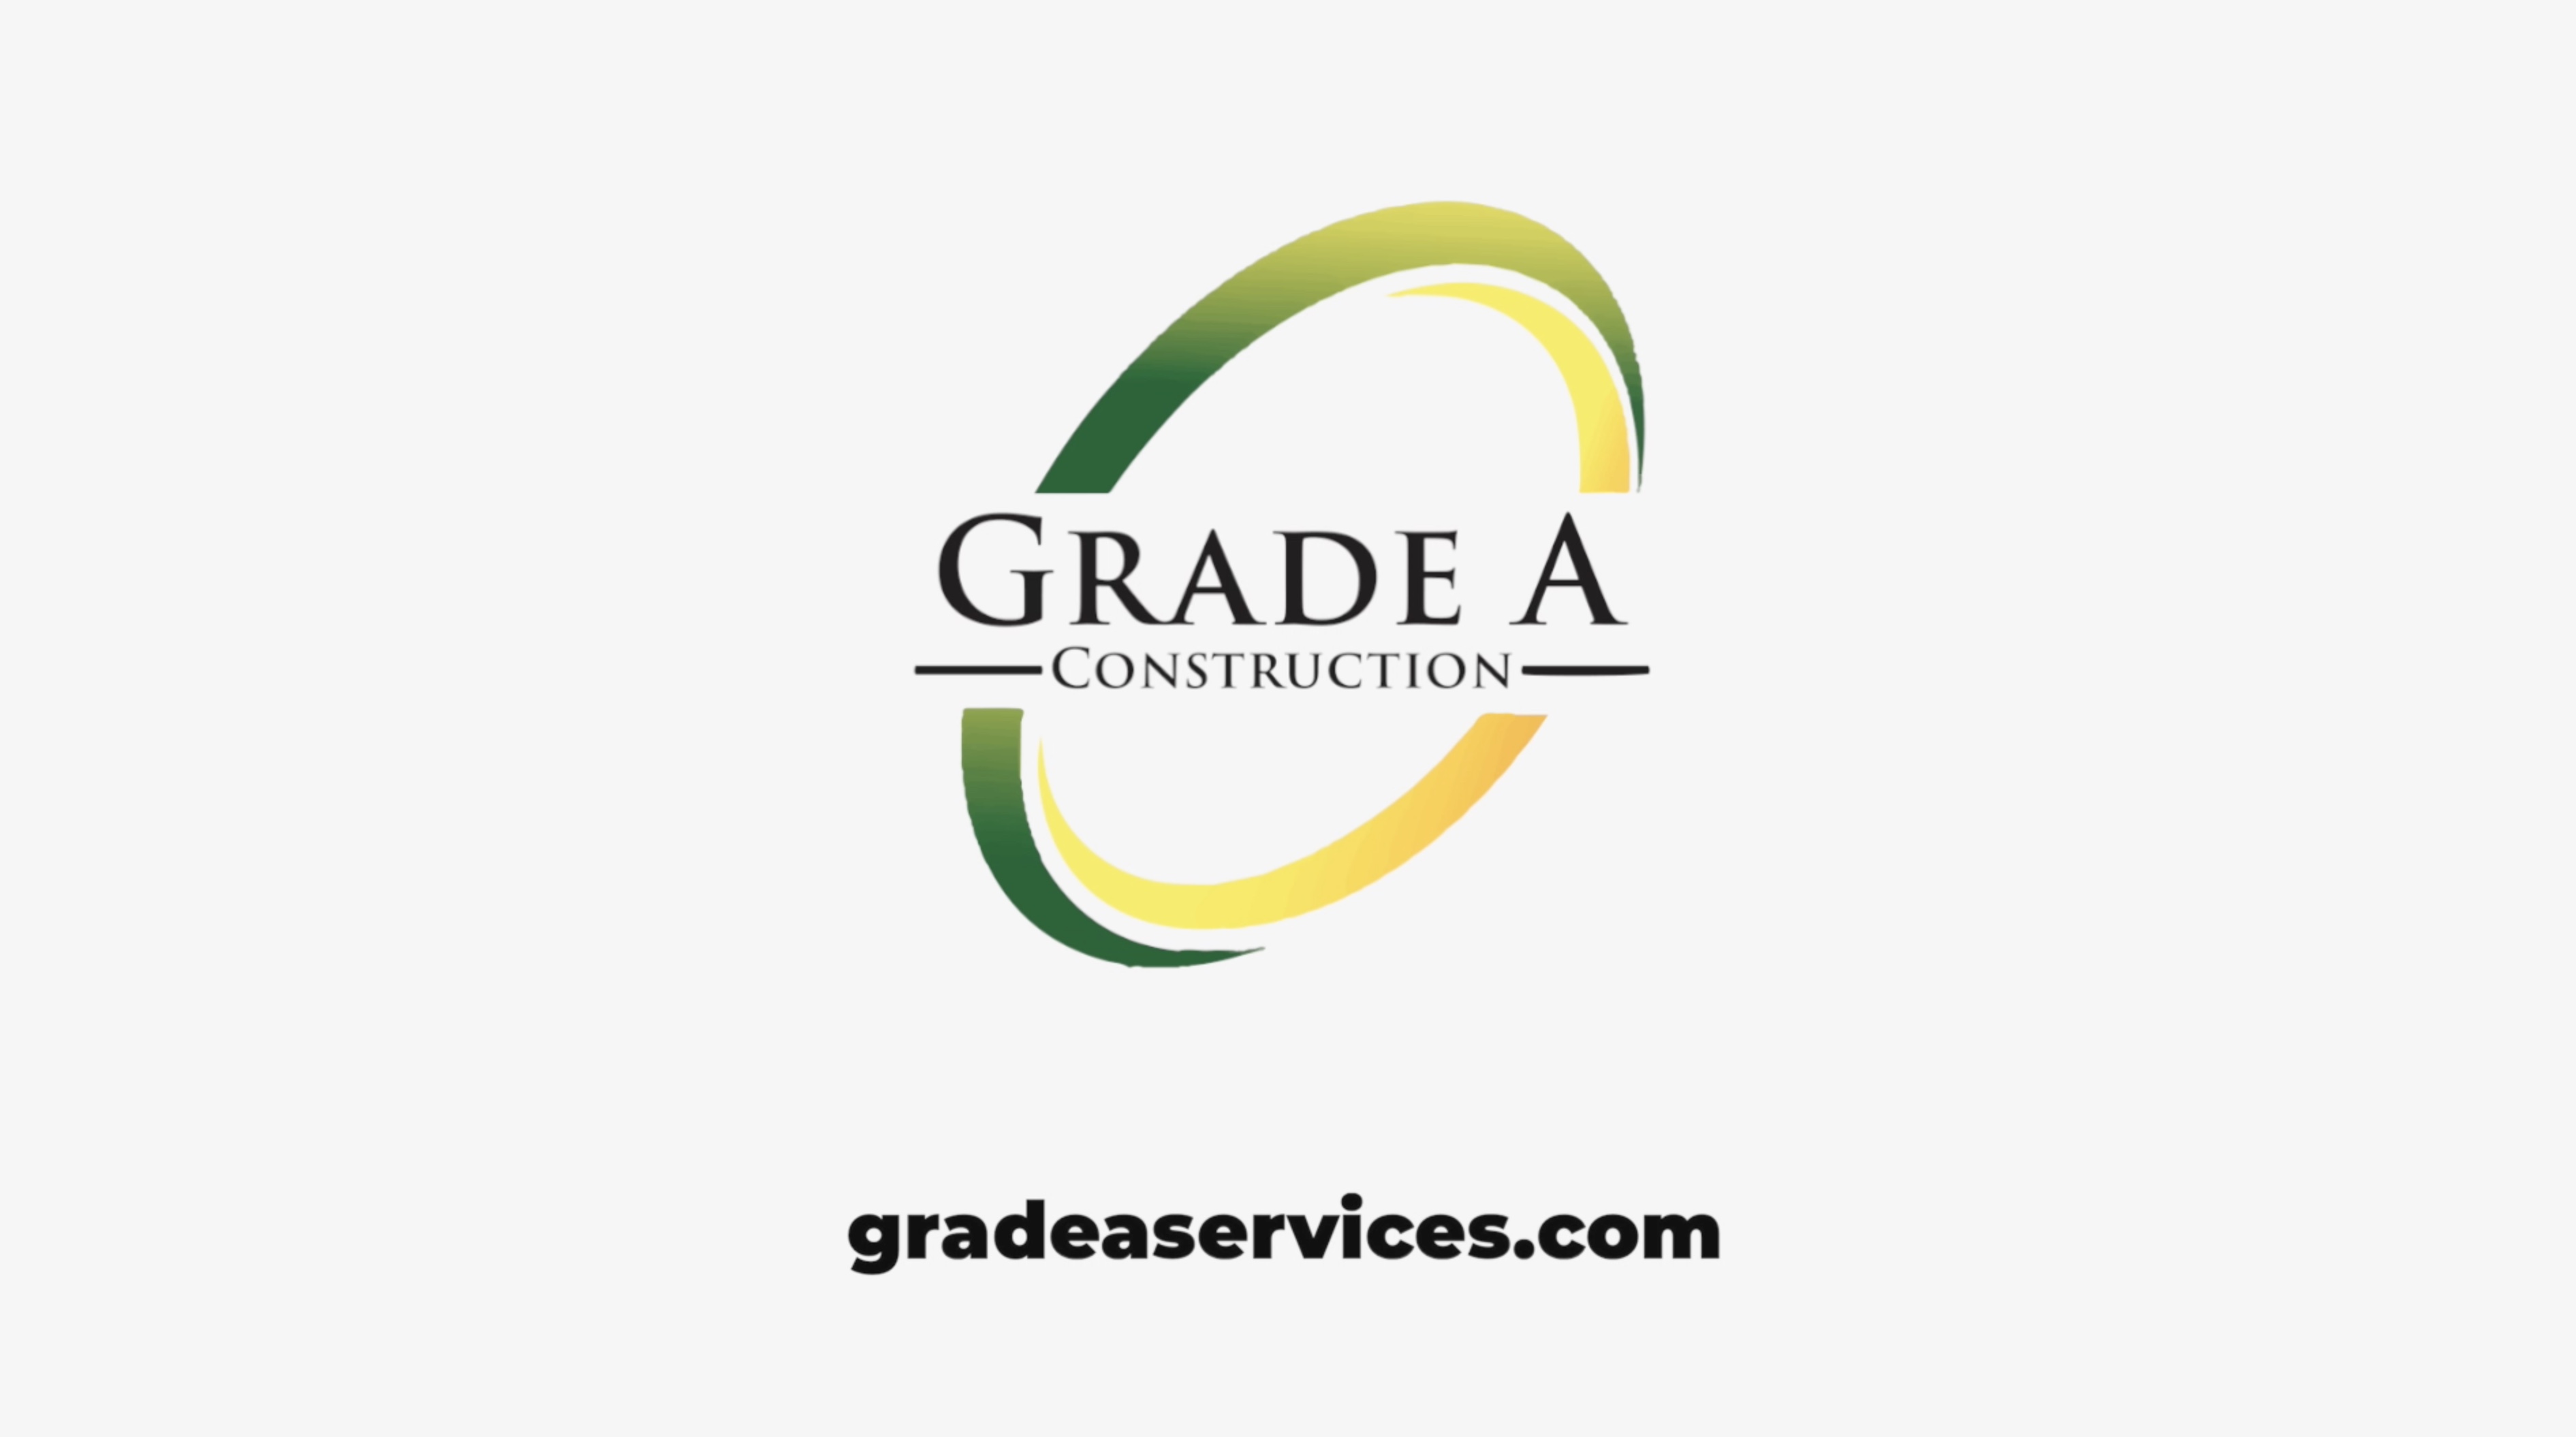 Serious, Professional, Construction Company Logo Design for Juliet